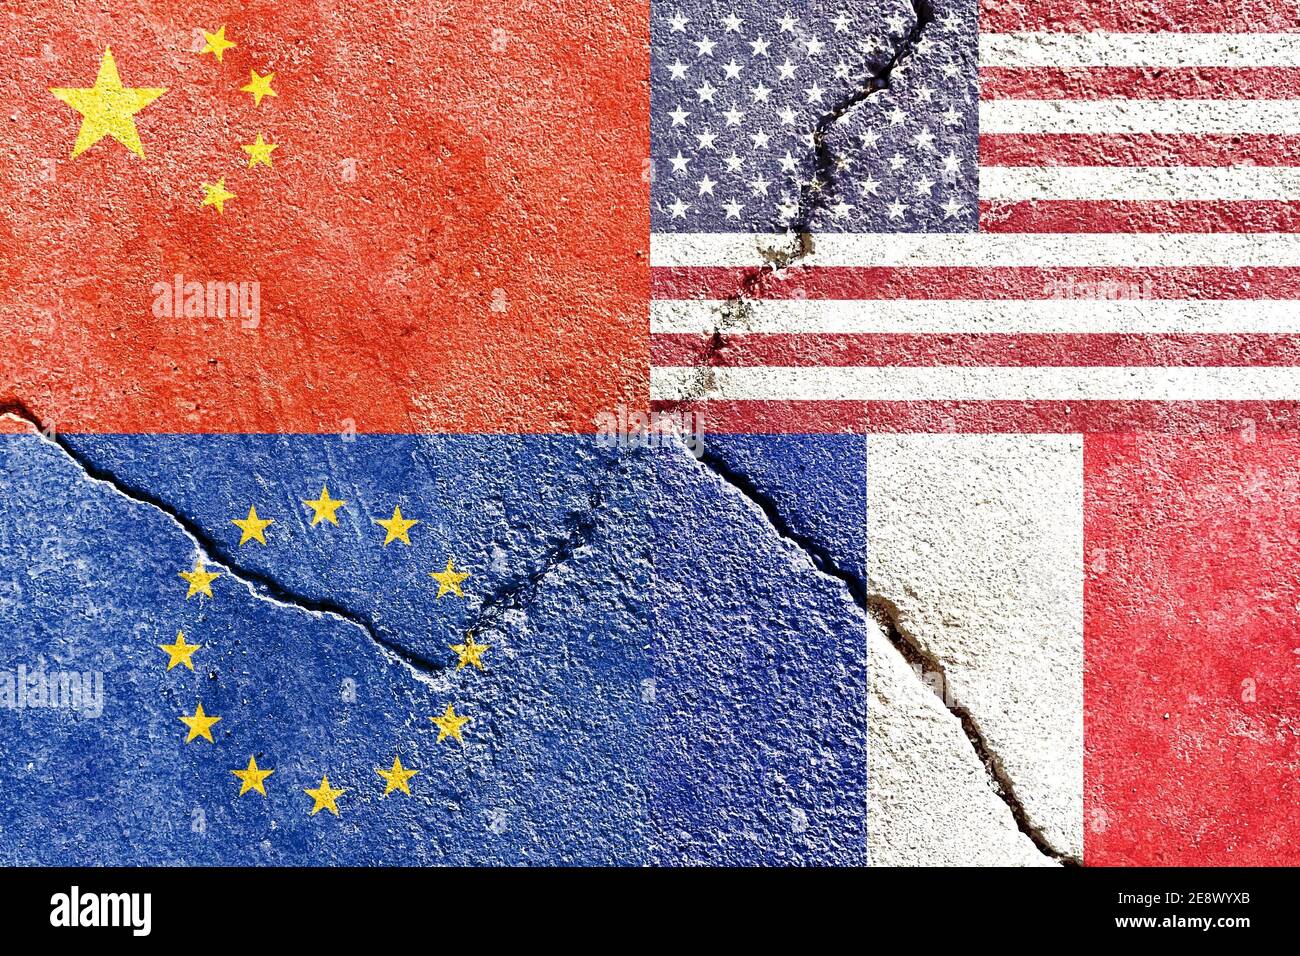 Closeup of USA, China, EU, and France flags on weathered and cracked wall background Stock Photo